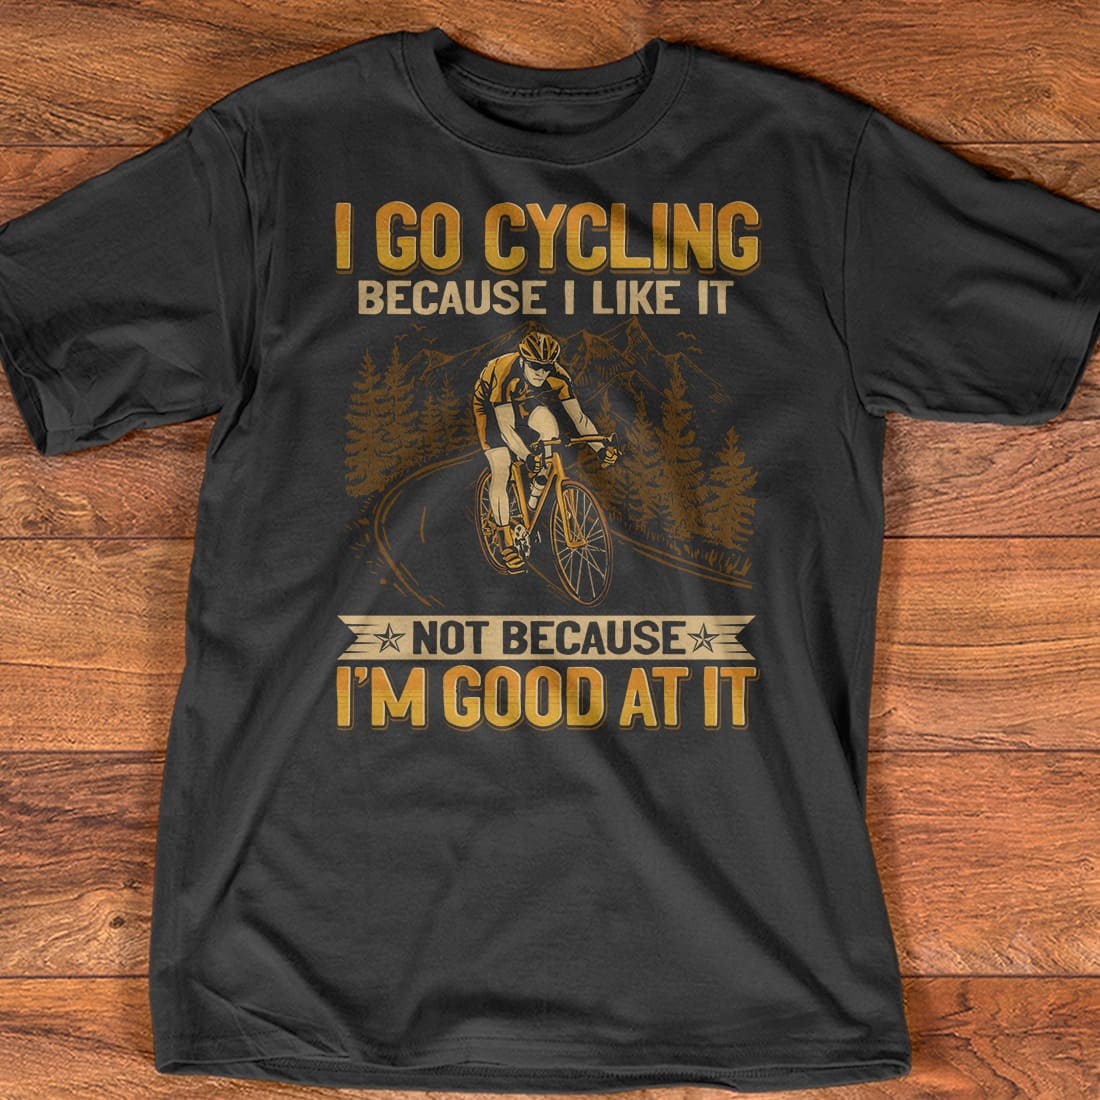 I go cycling because I like it not because I'm good at it - Love to go cycling, man go cycling